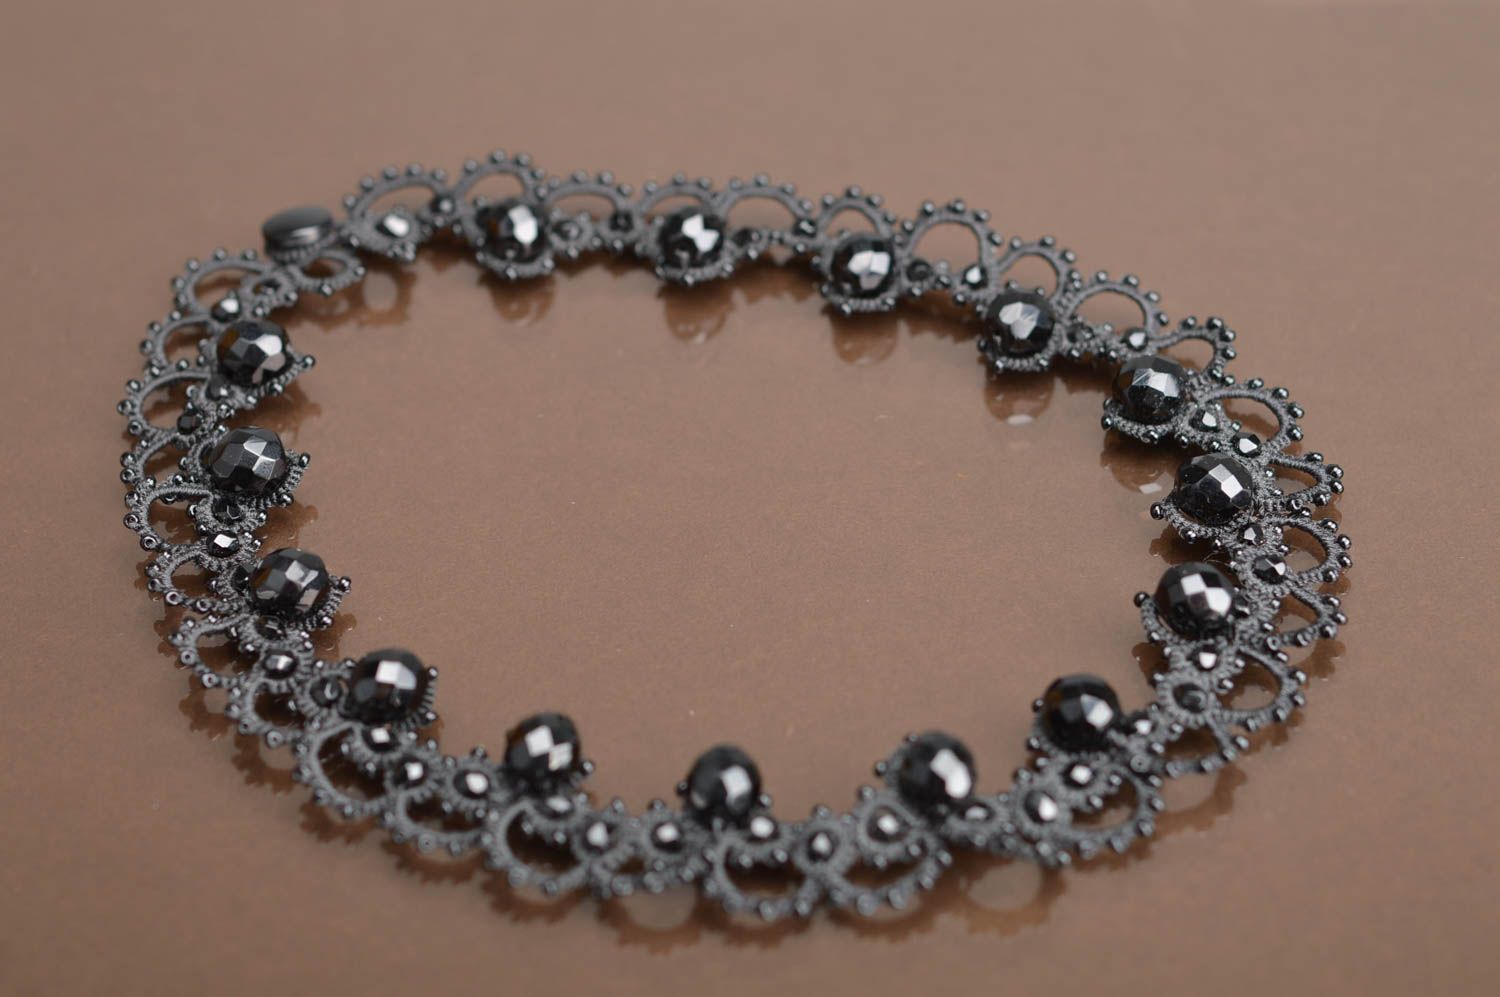 Handmade black necklace made of Czech beads and threads using tatting technique photo 2